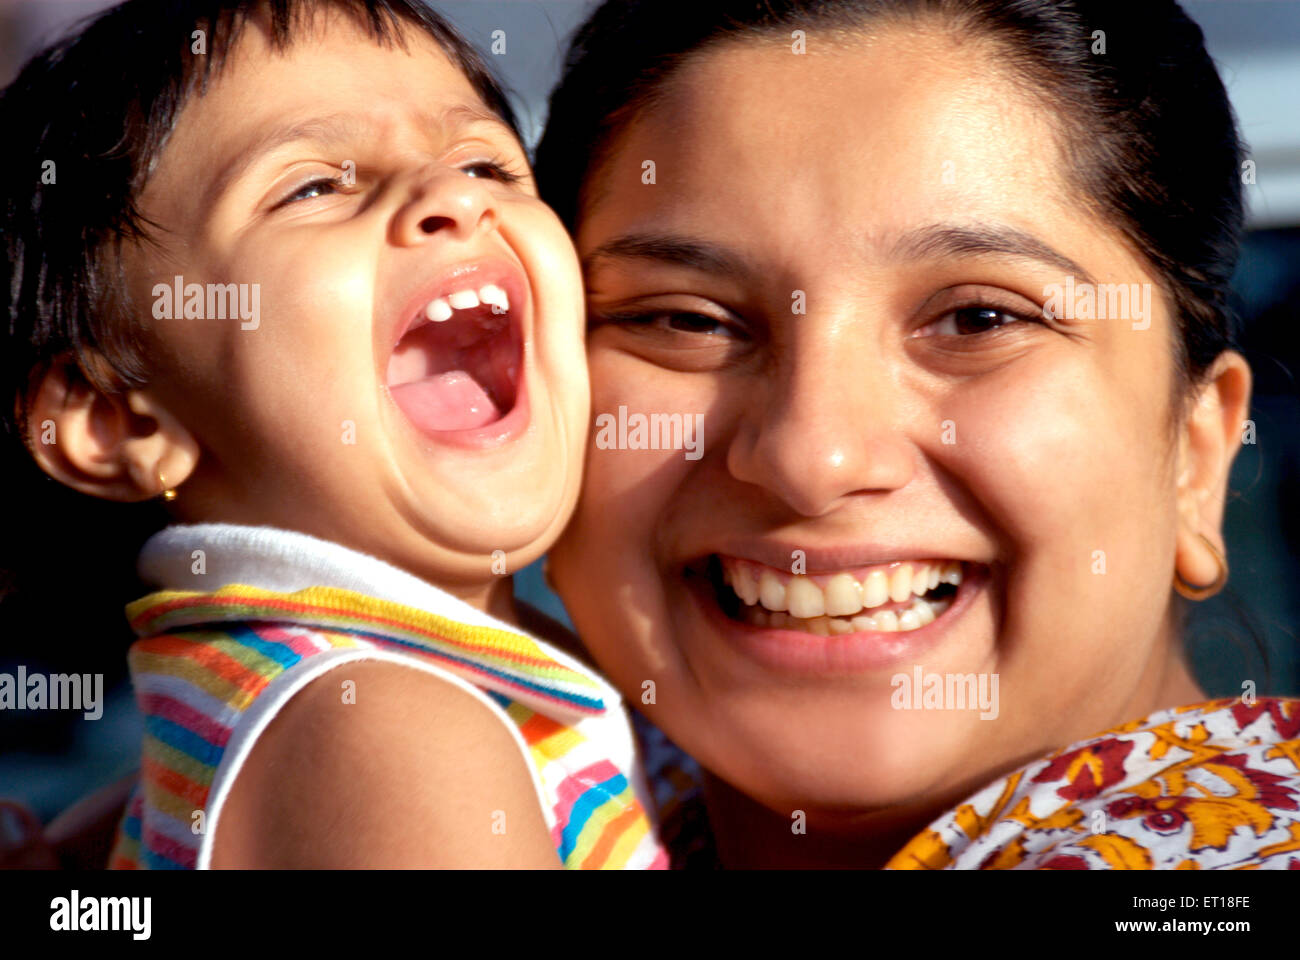 Indian Mother and Child cheeks touching laughing -  MR#364 - rmm 179788 Stock Photo